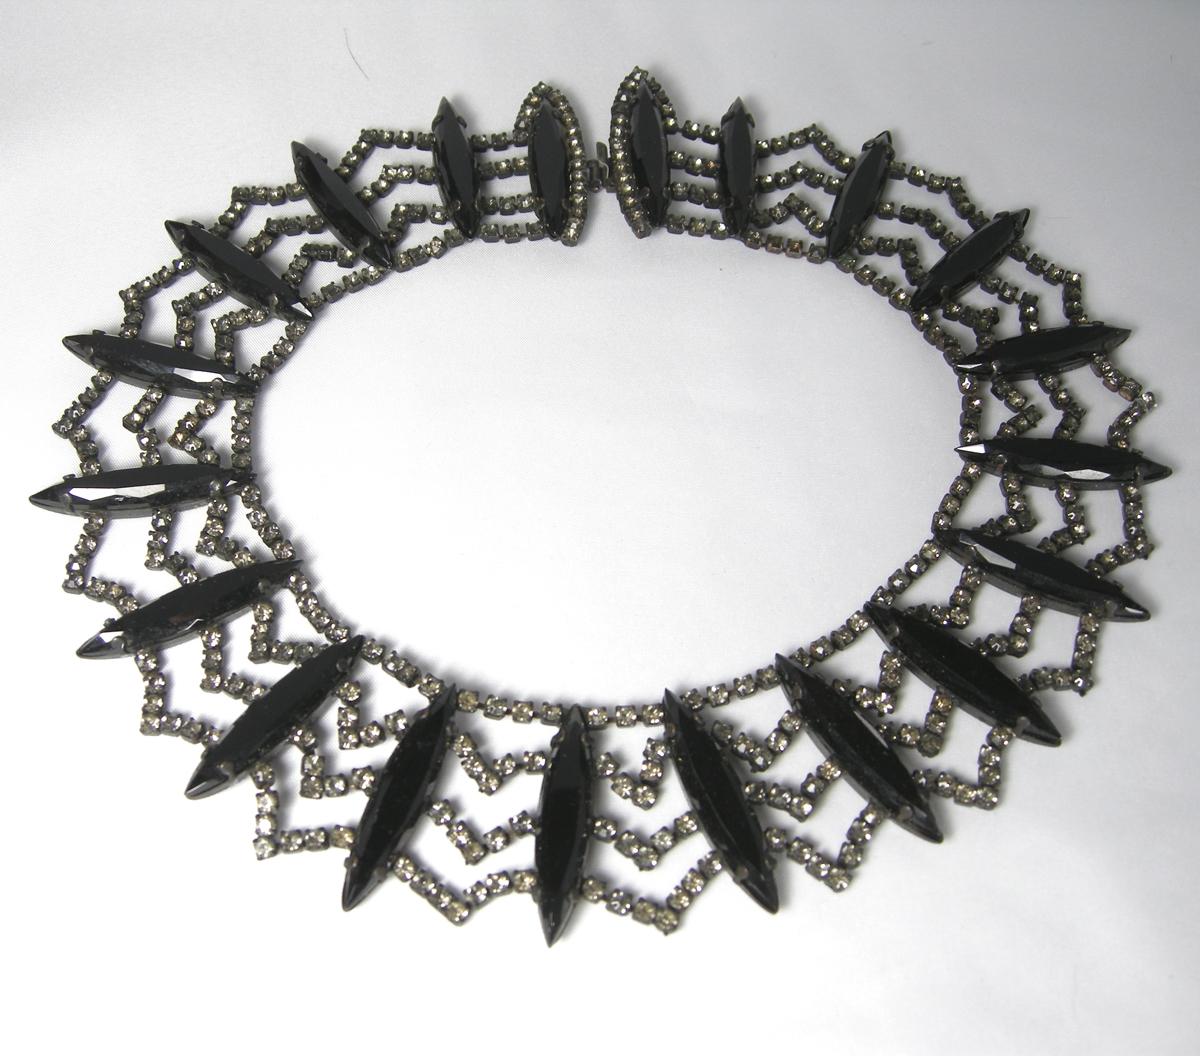 This rare vintage 1950s signed Hattie Carnegie collar necklace has 20 black glass marquise stones … each divided by four rows of rhinestones.  It has a slide-in clasp.  It measures 16” long x 1-1/2” wide in a Japanned metal finish.  It is signed